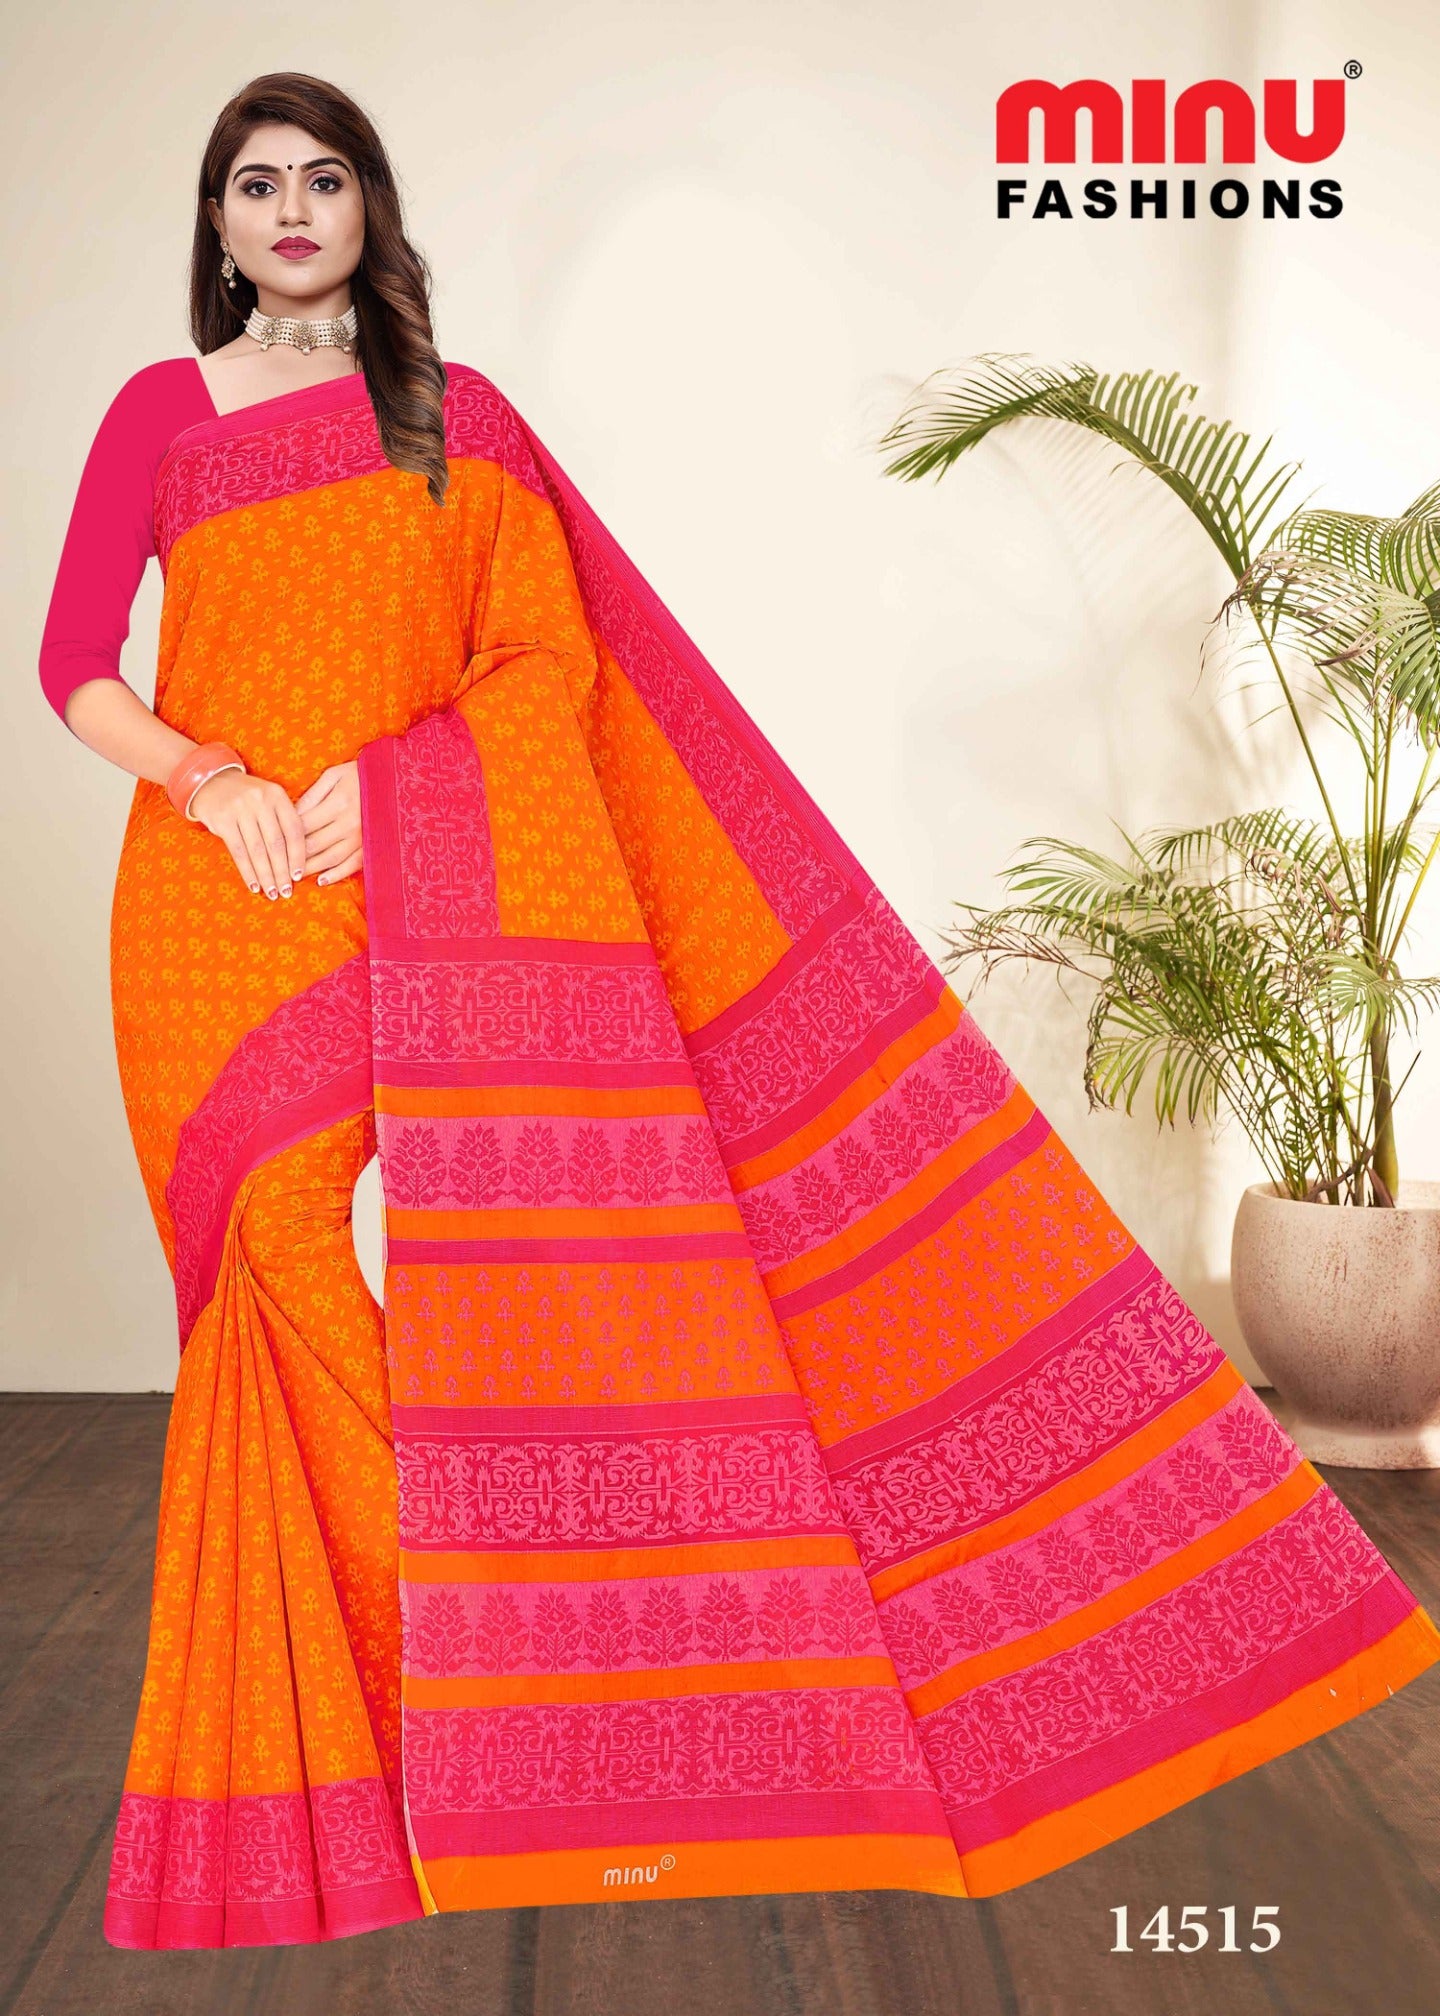 woman wearing colorful cotton saree at low prices 